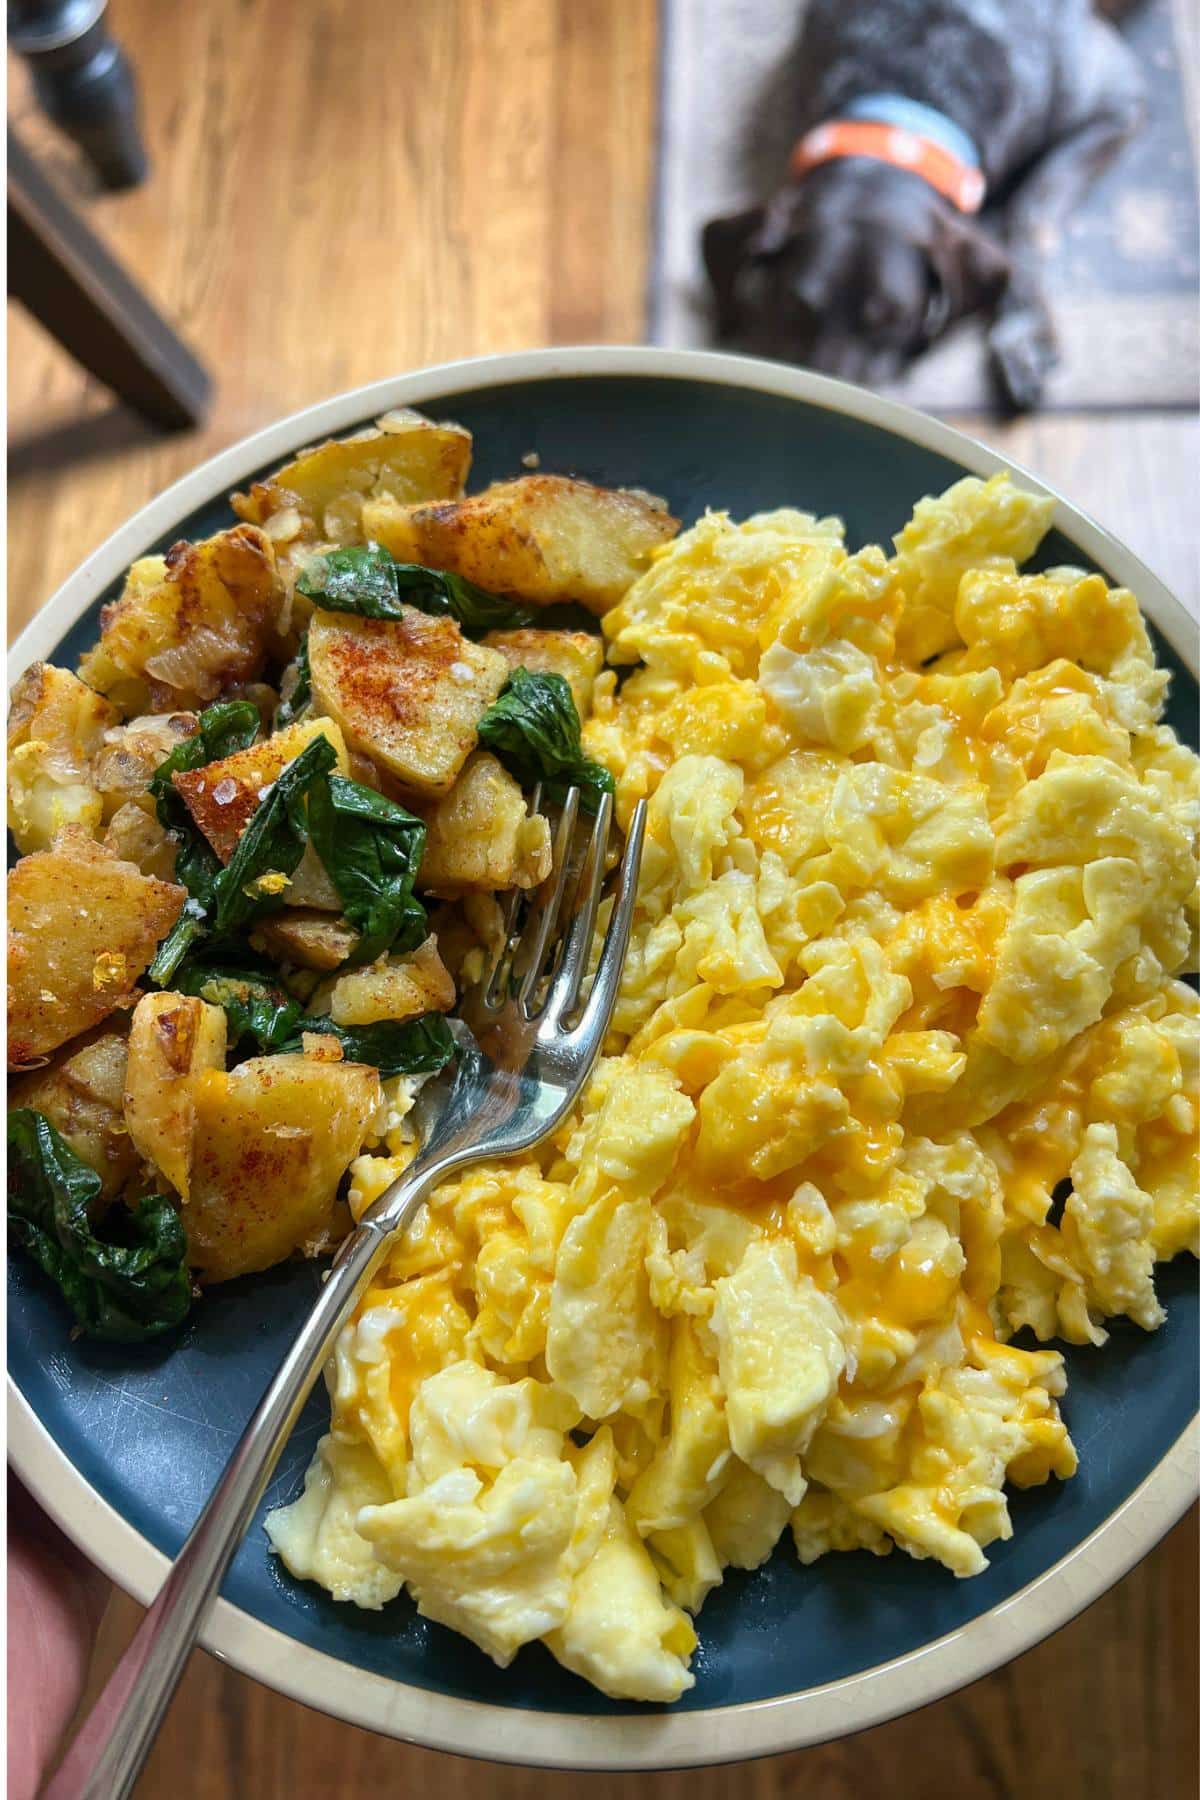  a plate of scrambled eggs with sauteed potatoes and wilted spinach